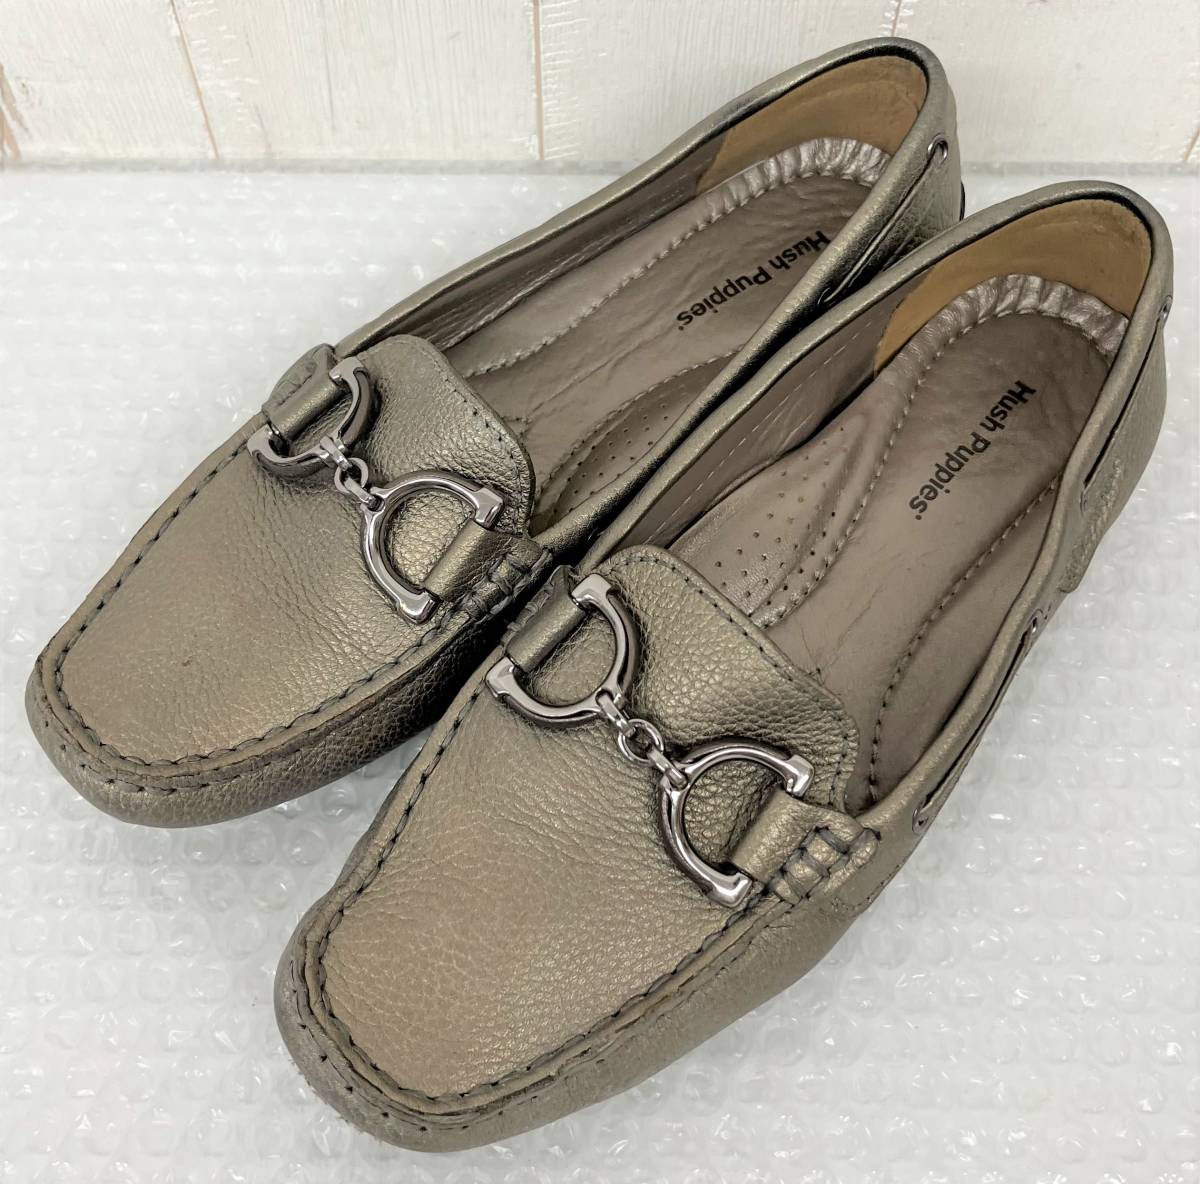 HUSH PUPPIES is shupapi-* driving shoes Loafer sneakers USA 6M size(23cm) * gun metallic series Schic adult on goods 